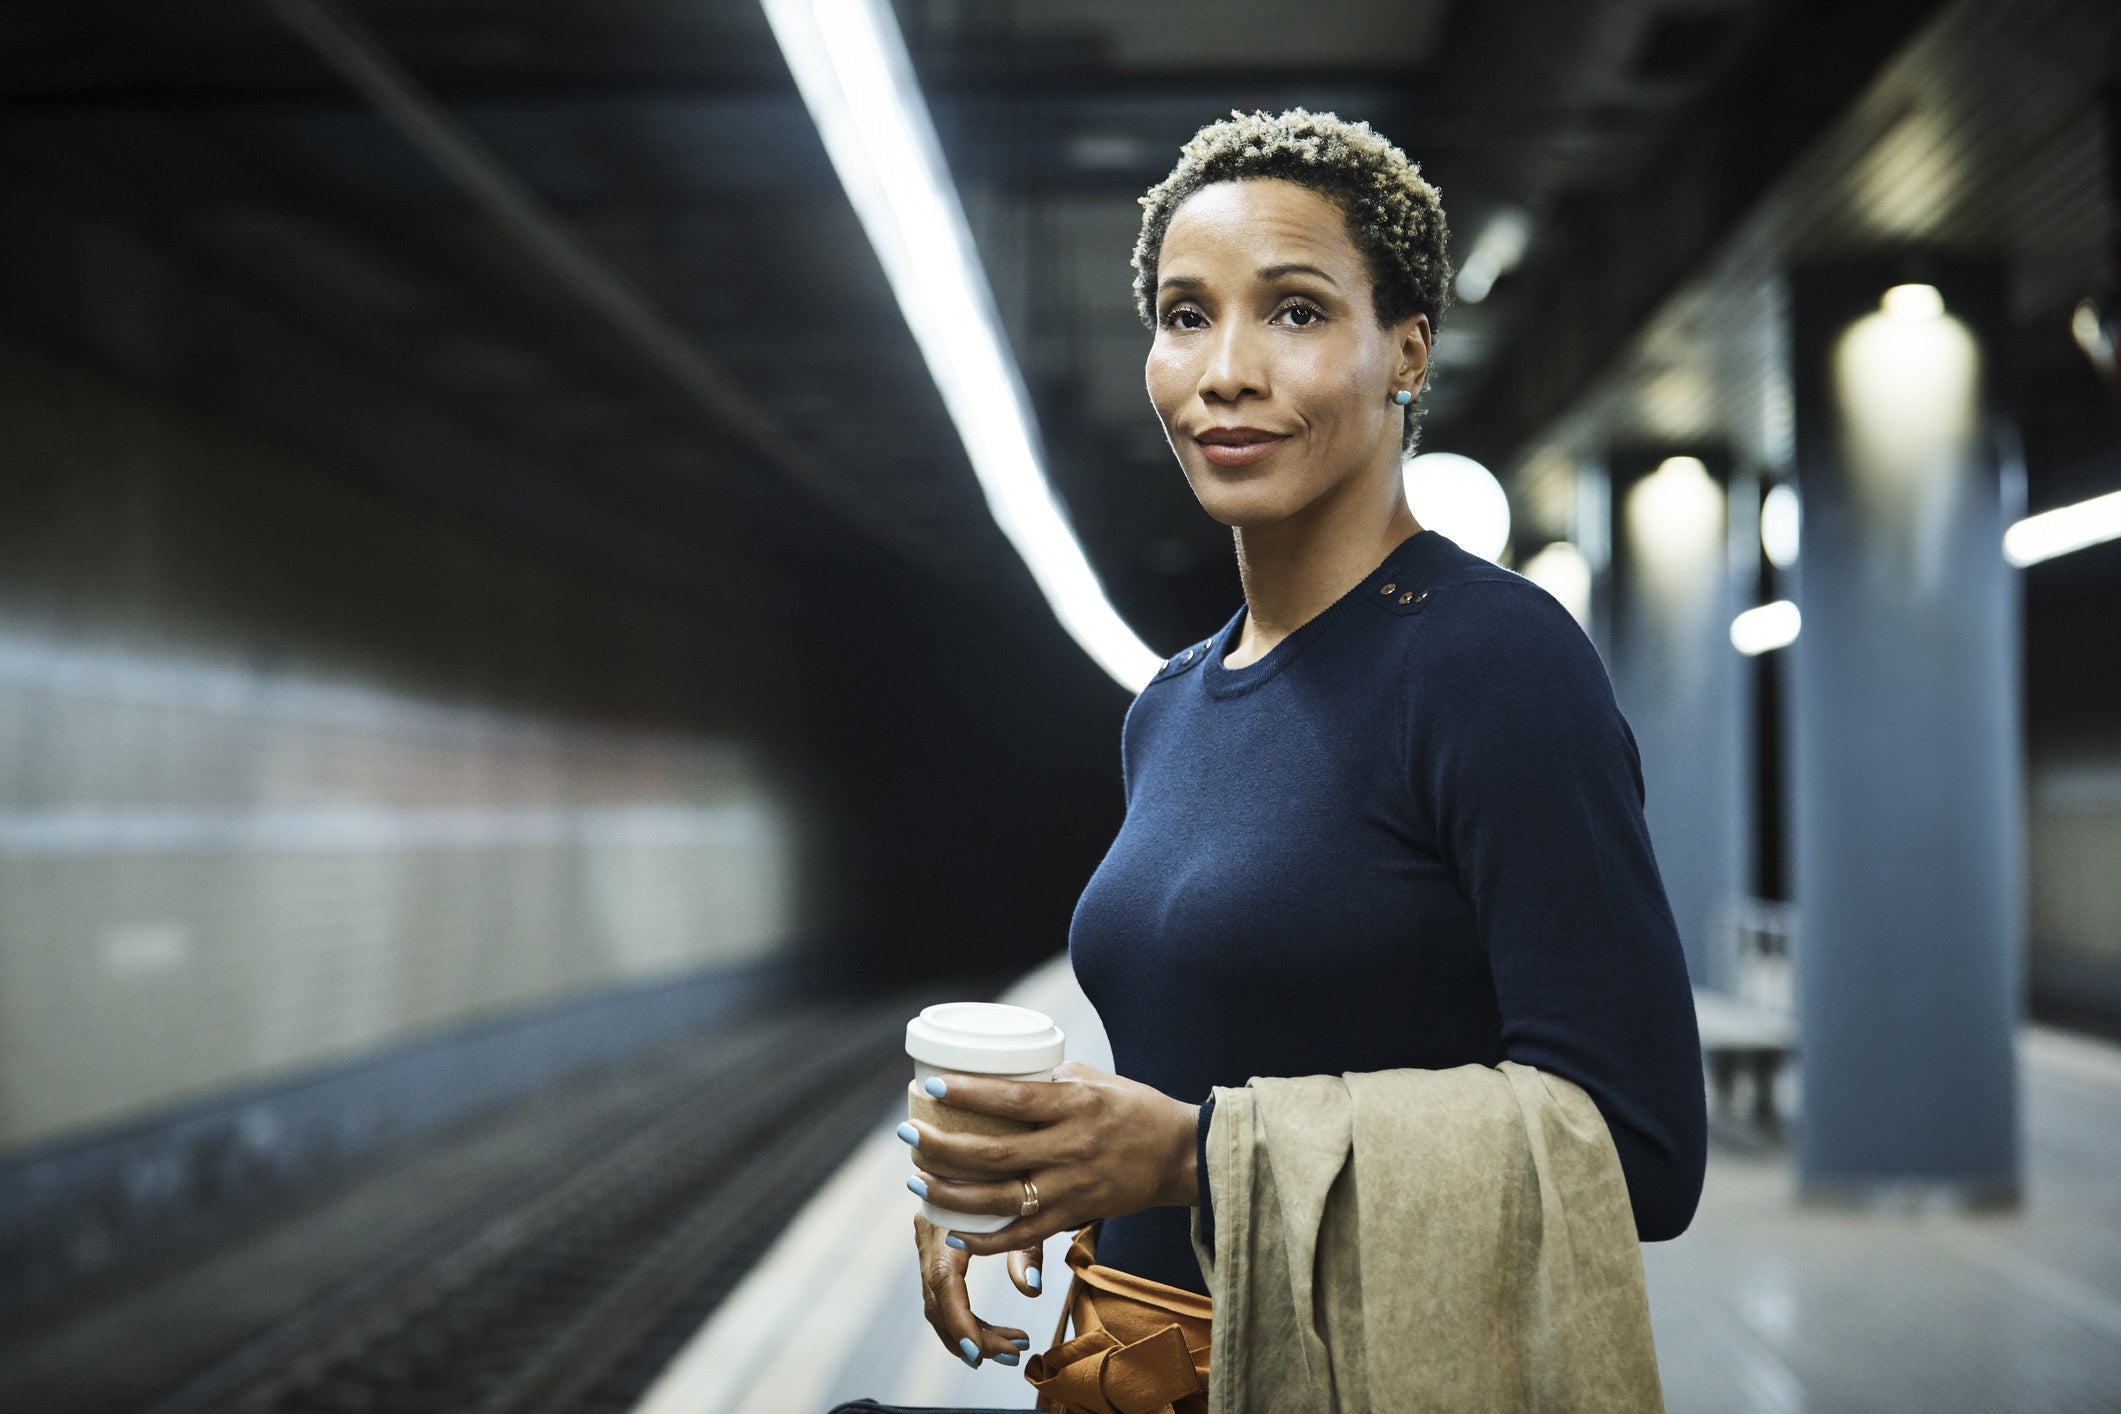 Woman waits for the subway